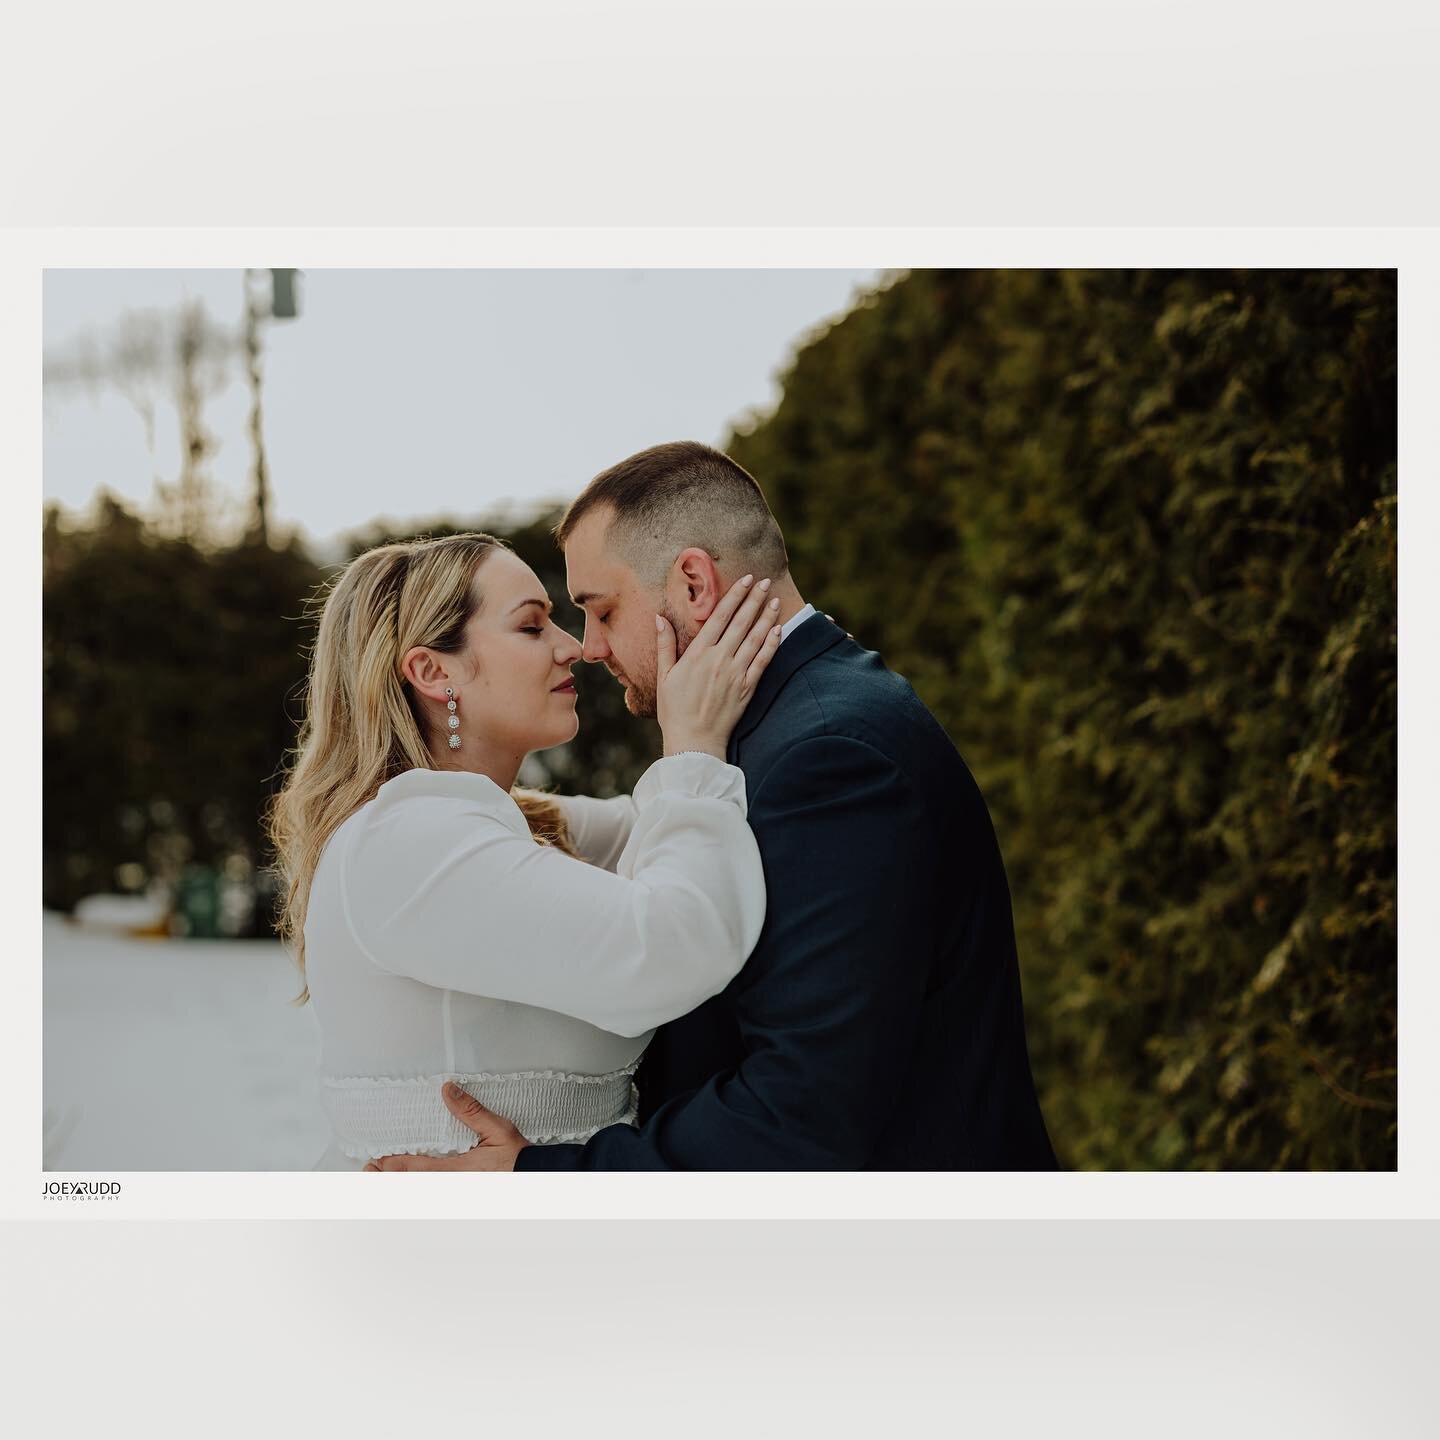 Some previews from @aprilj.w &amp; Brandon&rsquo;s elopement wedding! #wedding #elopement #elopementphotographer #weddingphotographer #weddingplanning #engaged #elopementinspiration